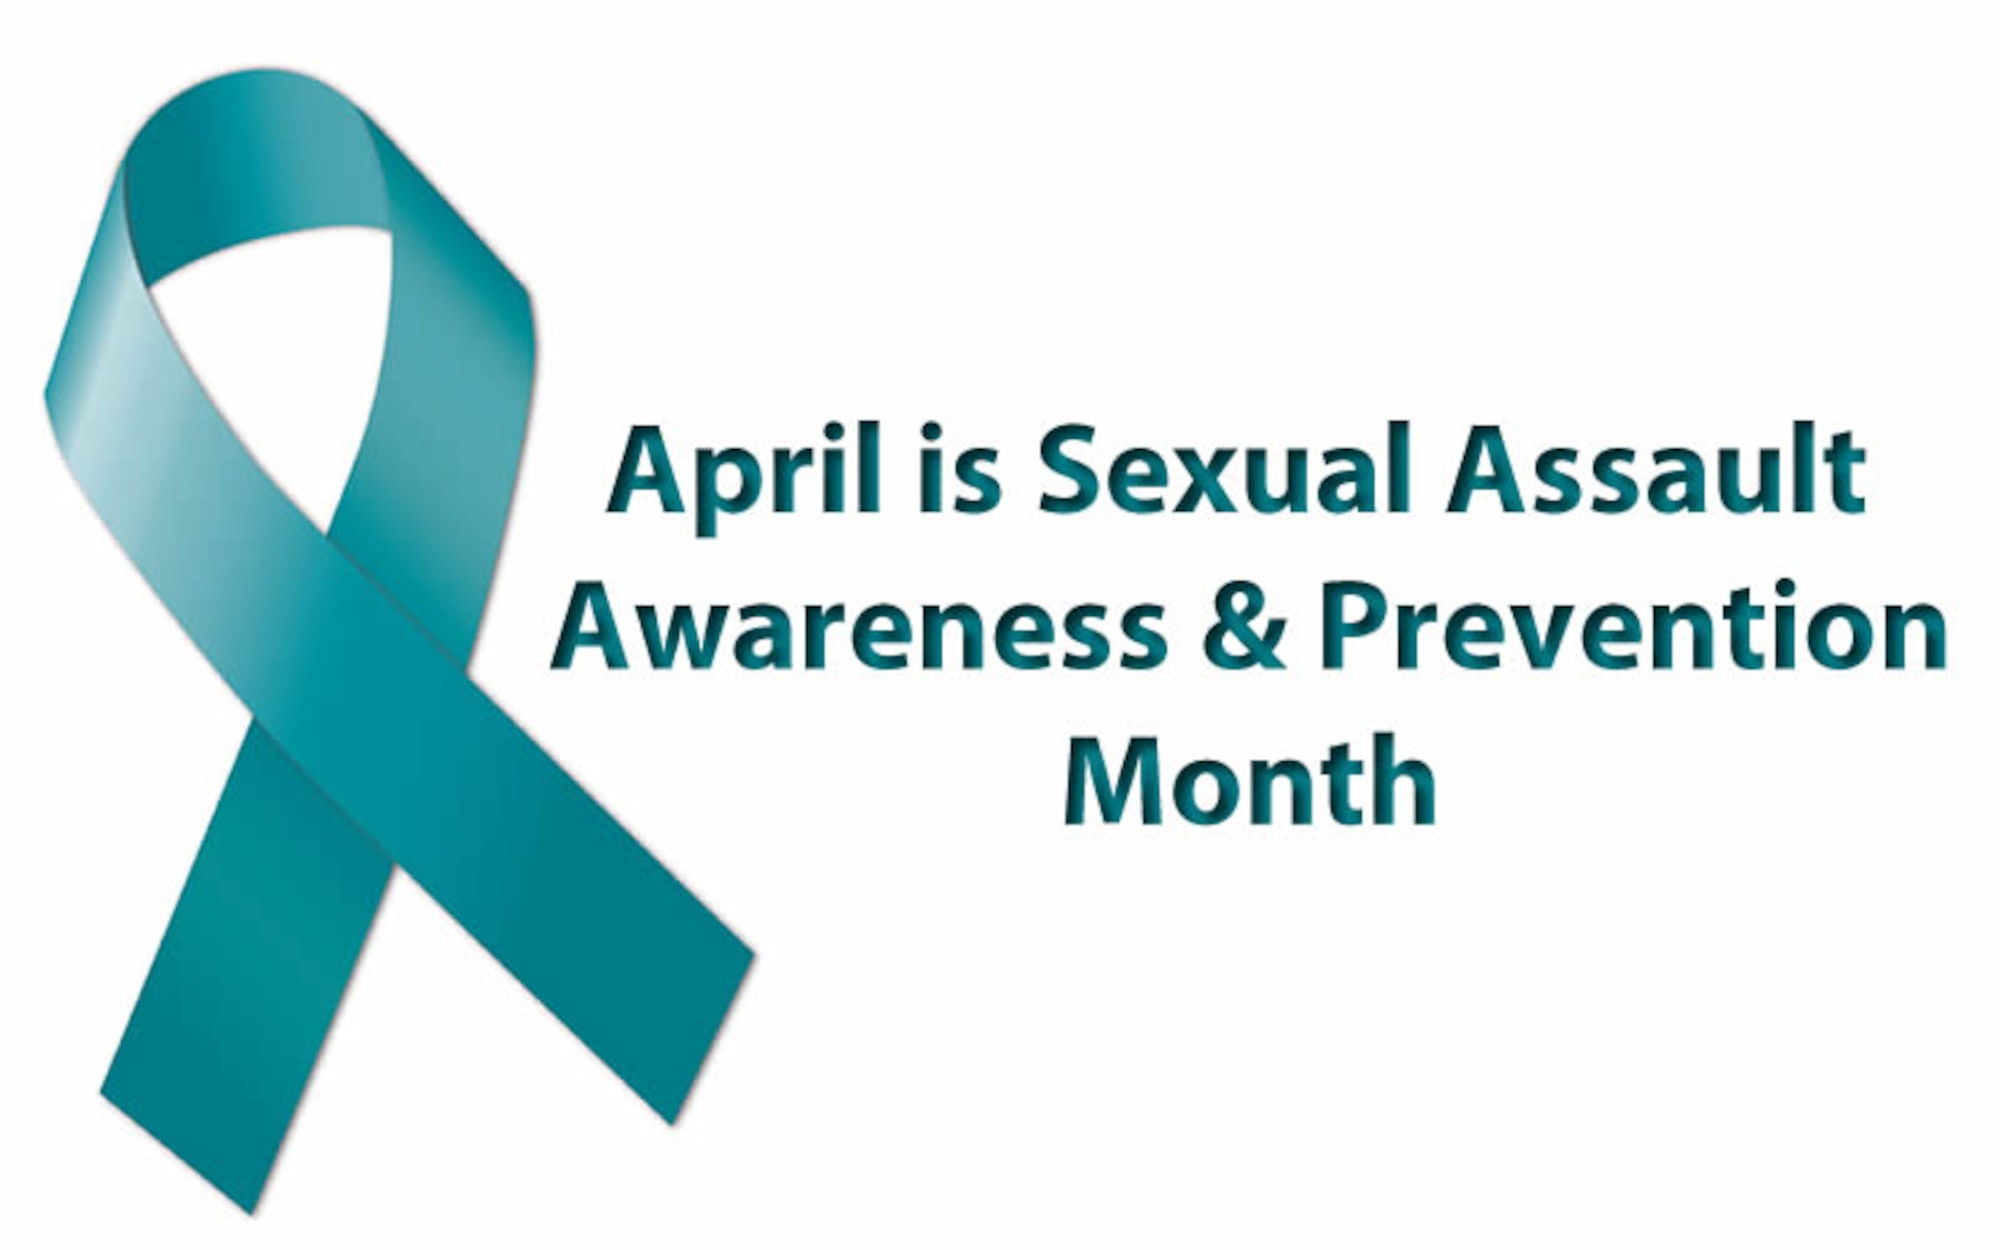 At installations around the world Airmen are working together to increase awareness, prevent and care for the victims of sexual assault, with a variety of observances underway in observance of Sexual Assault Awareness Month.